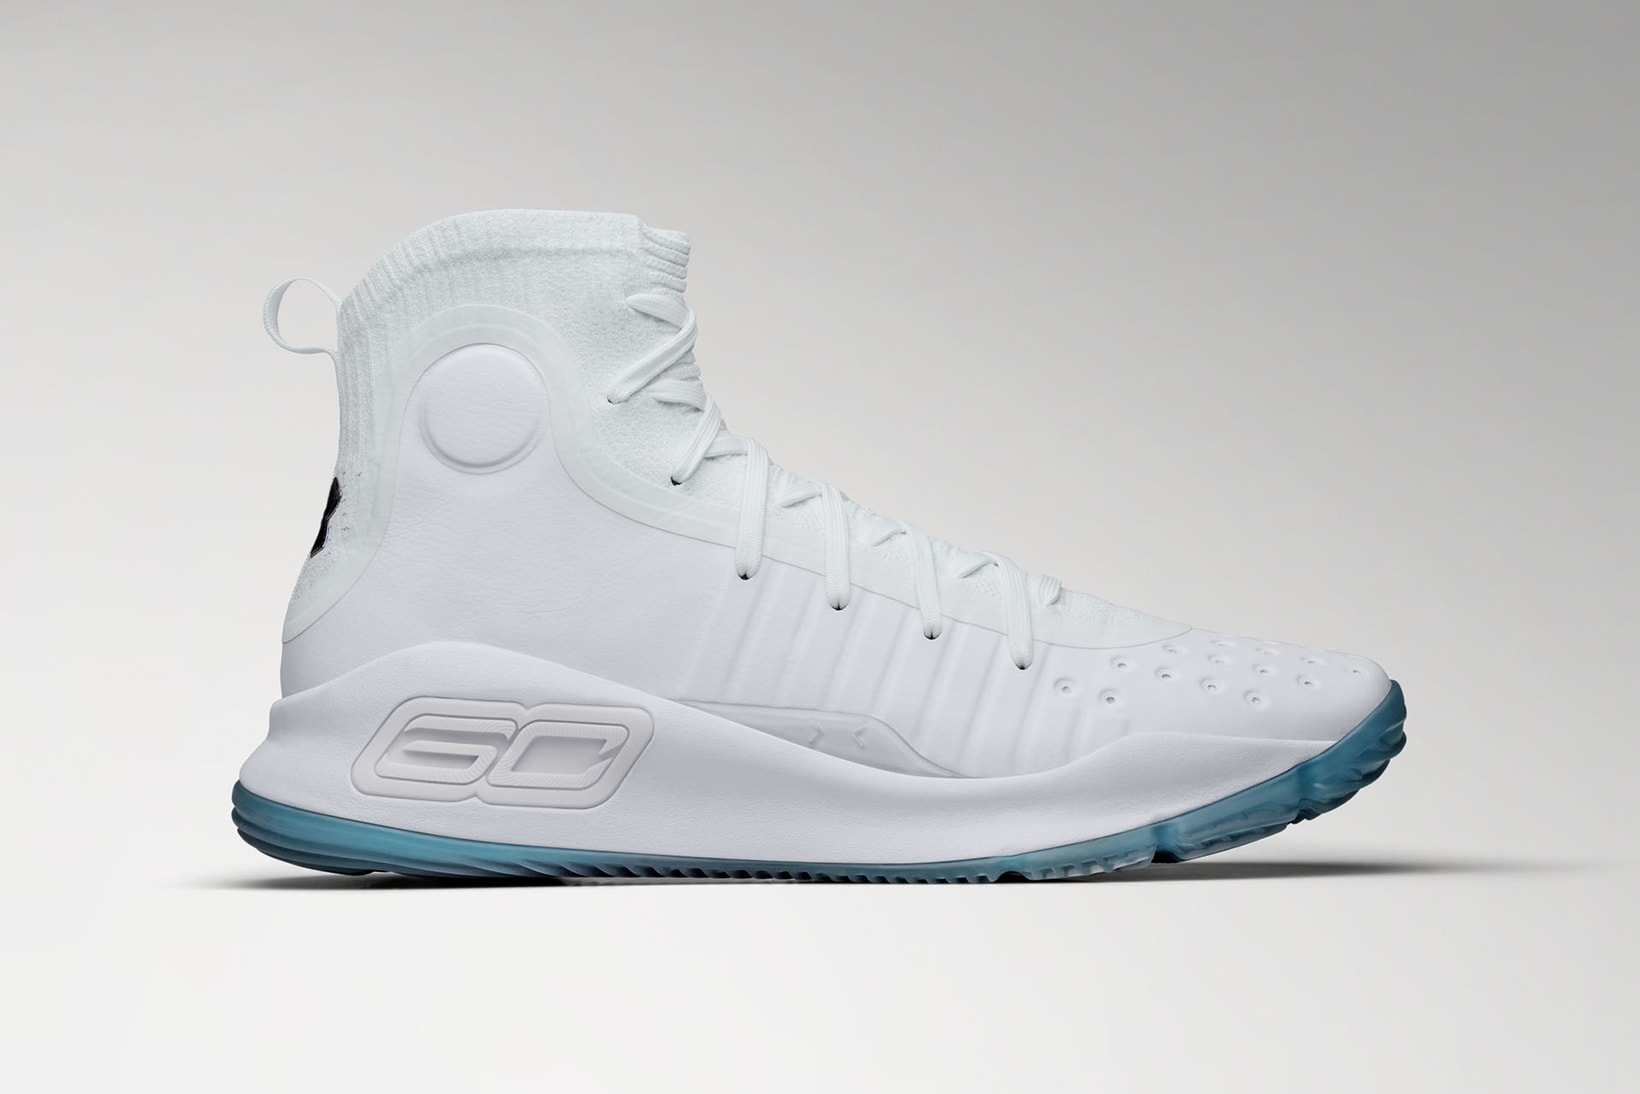 Under Armour Curry 4 All Star white 2018 february 16 release date info los angeles la steph stephen golden state warriors